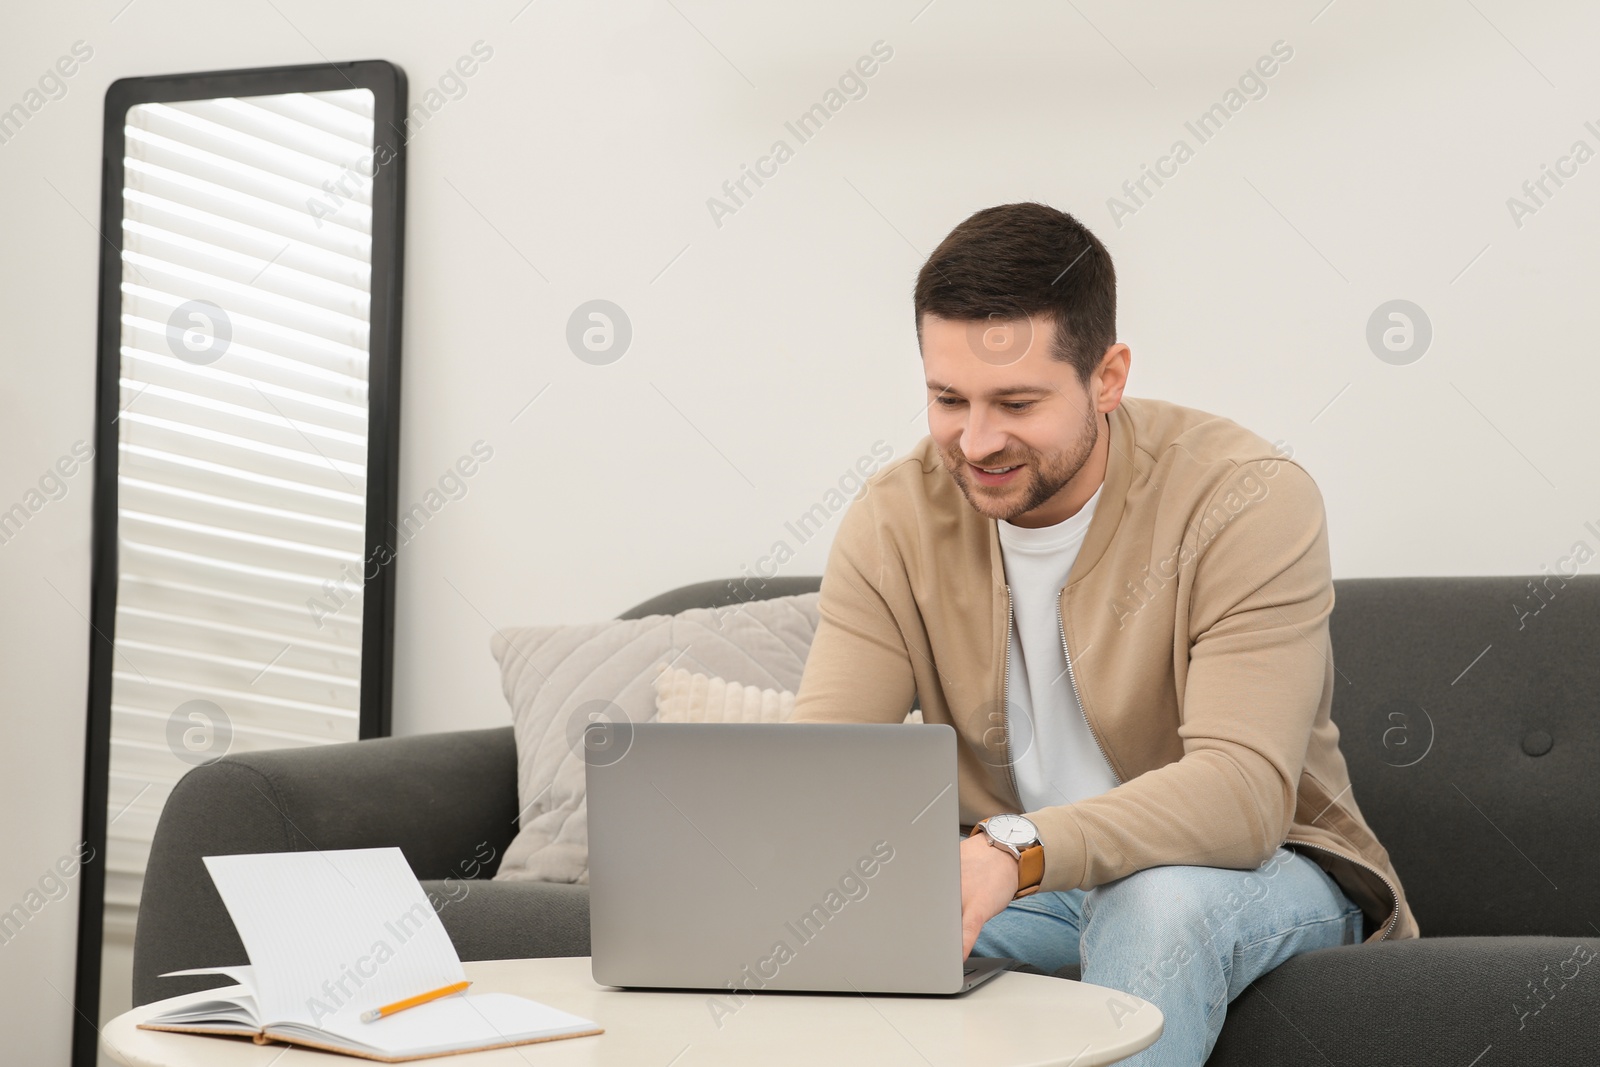 Photo of Man working with laptop at table in living room